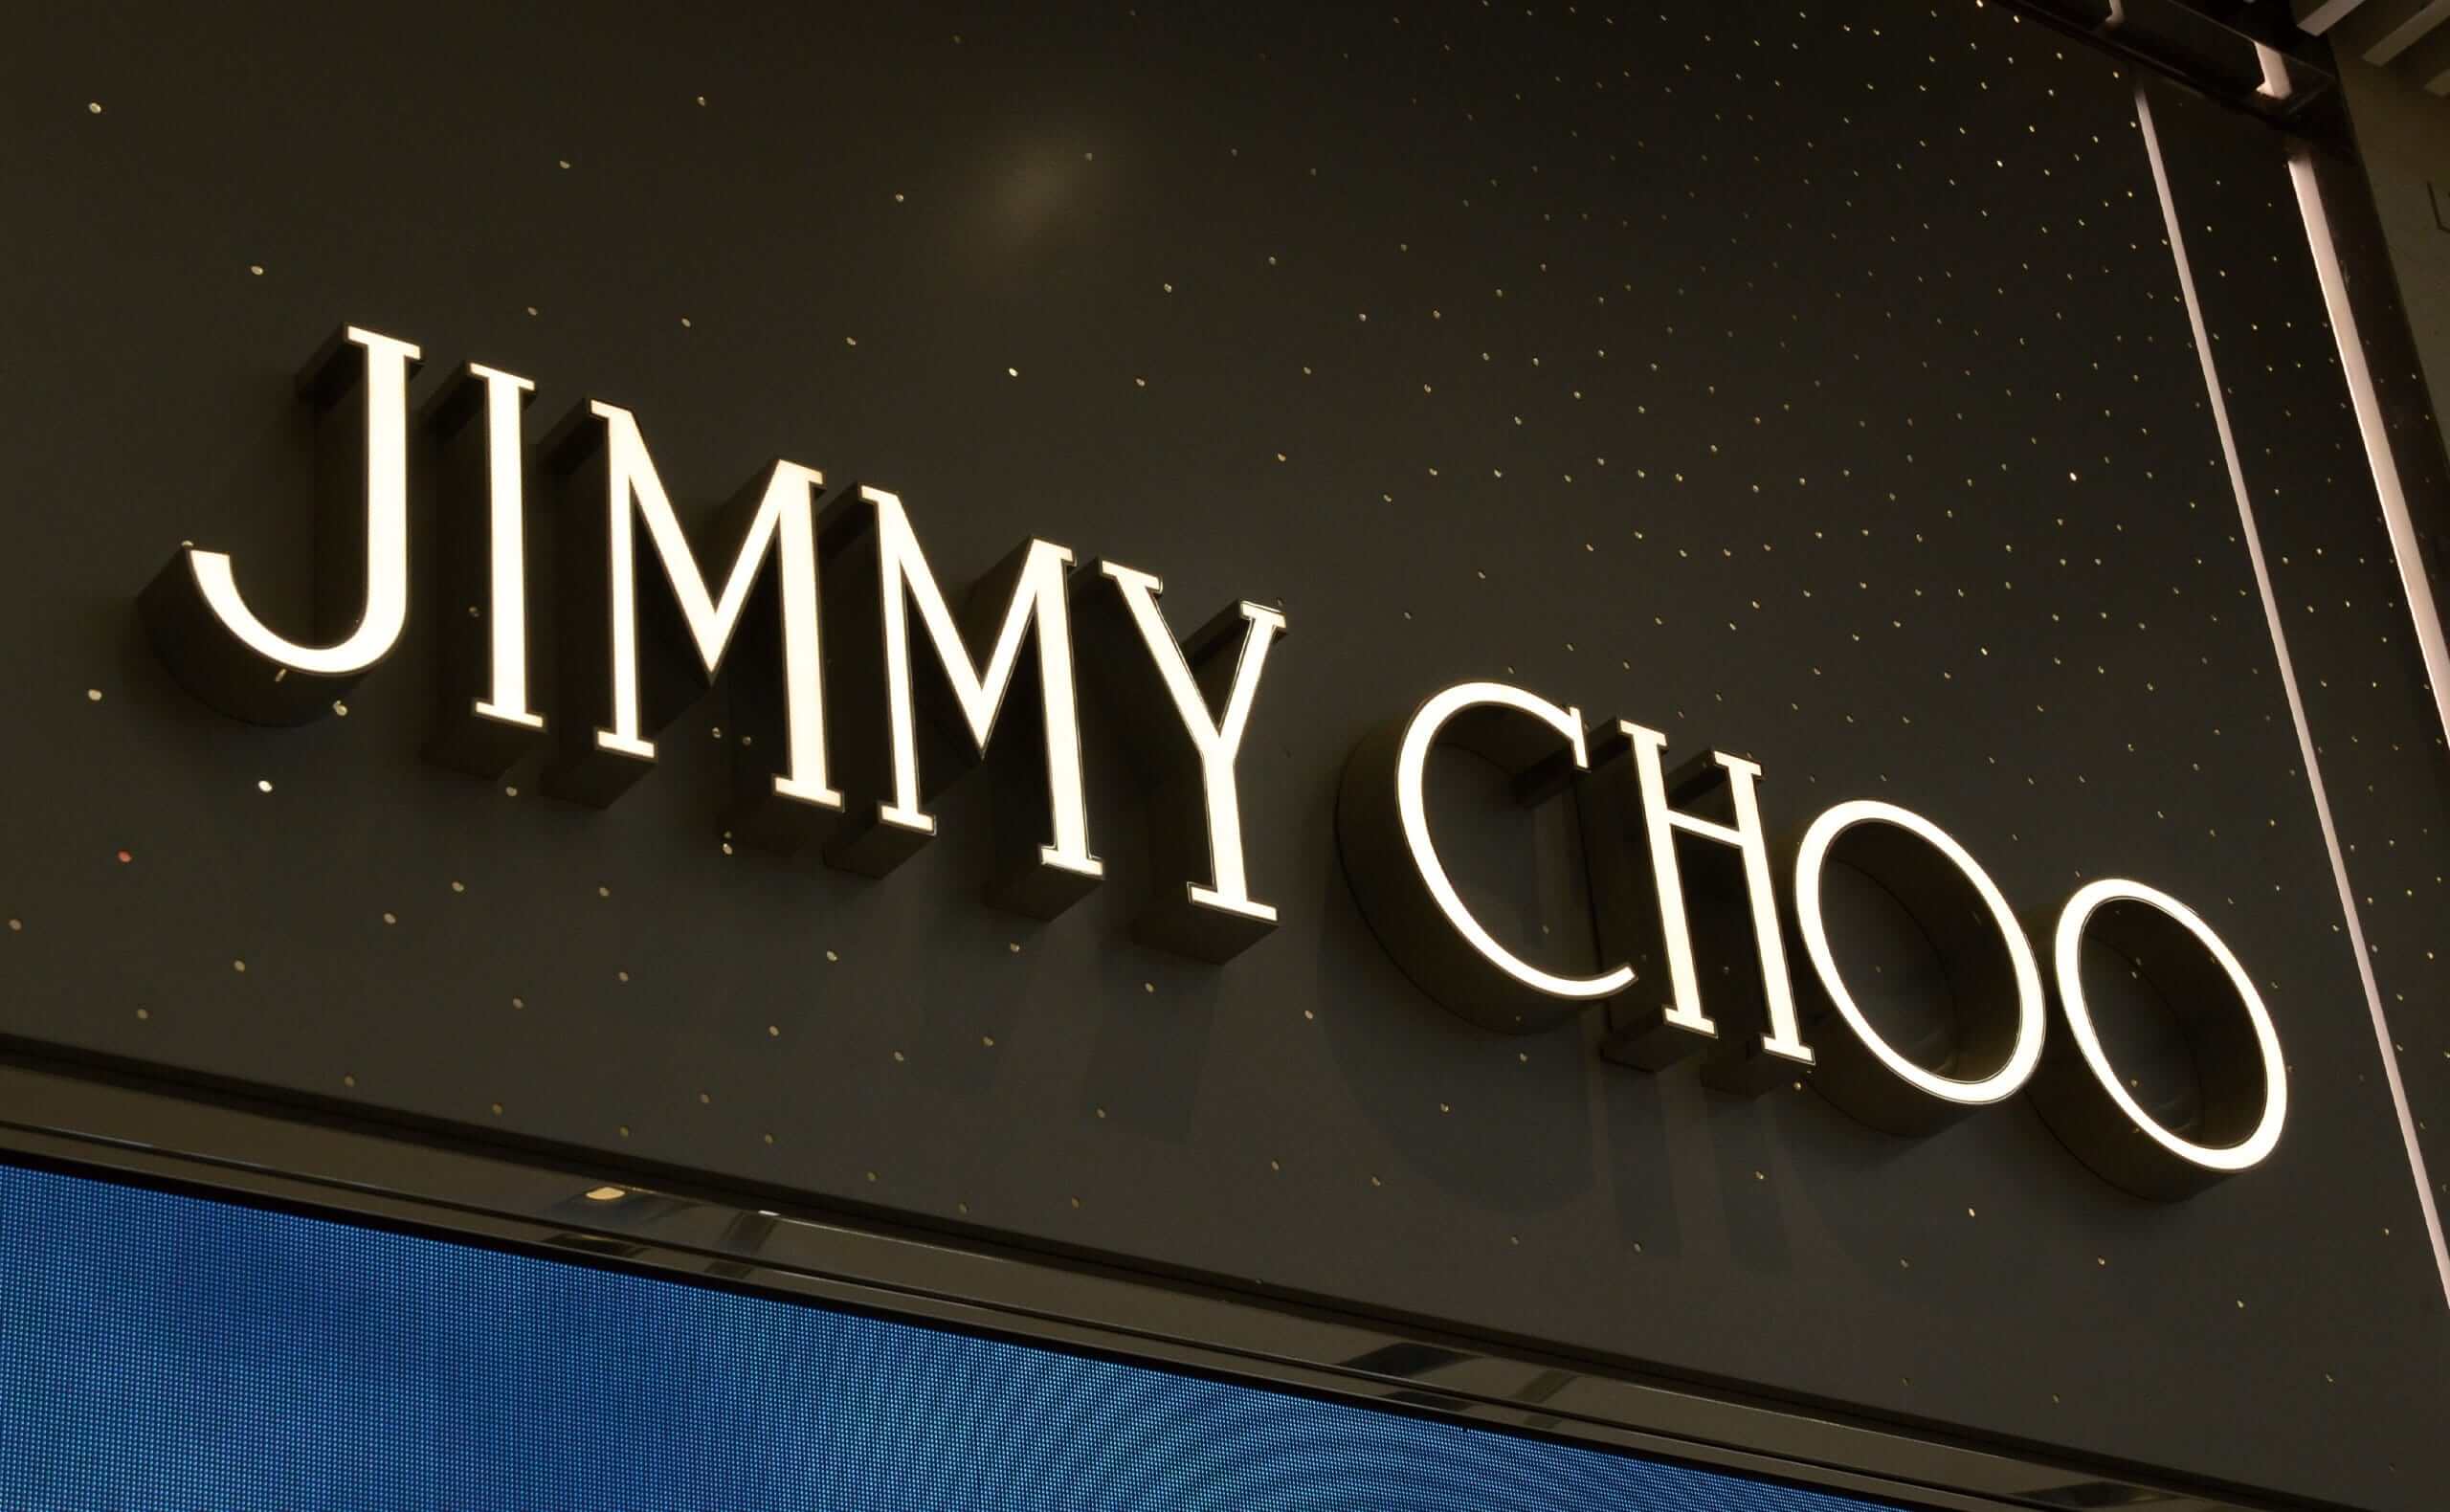 Front Lit Channel Letters for Jimmy Choo